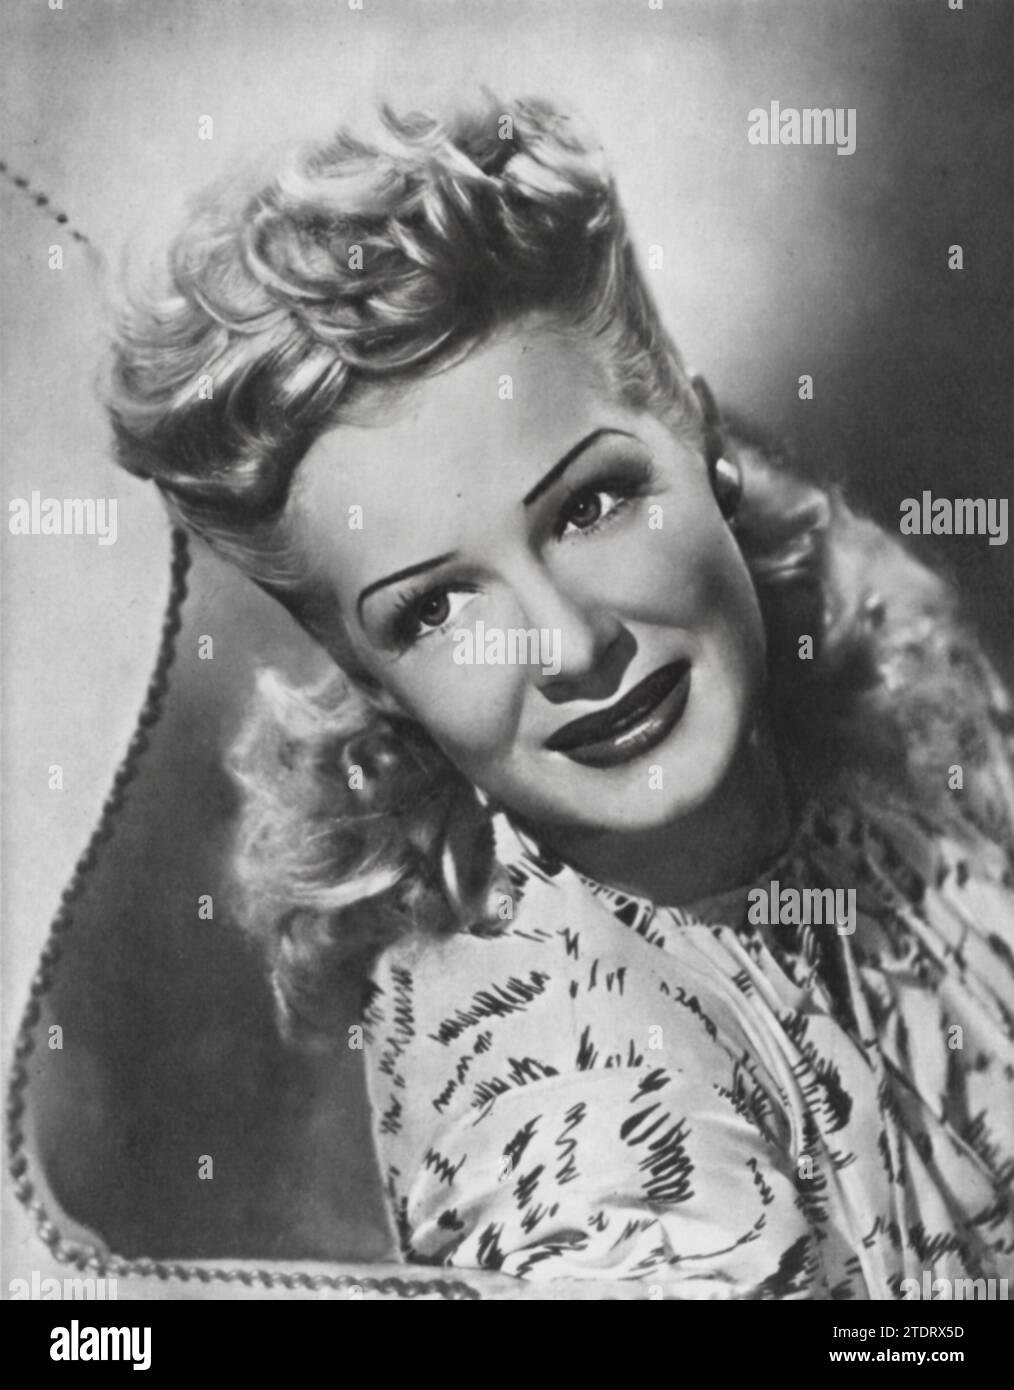 Betty Hutton (born February 26, 1921 - died March 12, 2007) starred in 'The Perils of Pauline' (1947), a biographical musical that humorously chronicles the life of silent film star Pearl White. Hutton's portrayal of White was both vibrant and captivating, showcasing her talents in a role that mirrored the dynamic and ambitious spirit of her character. Stock Photo